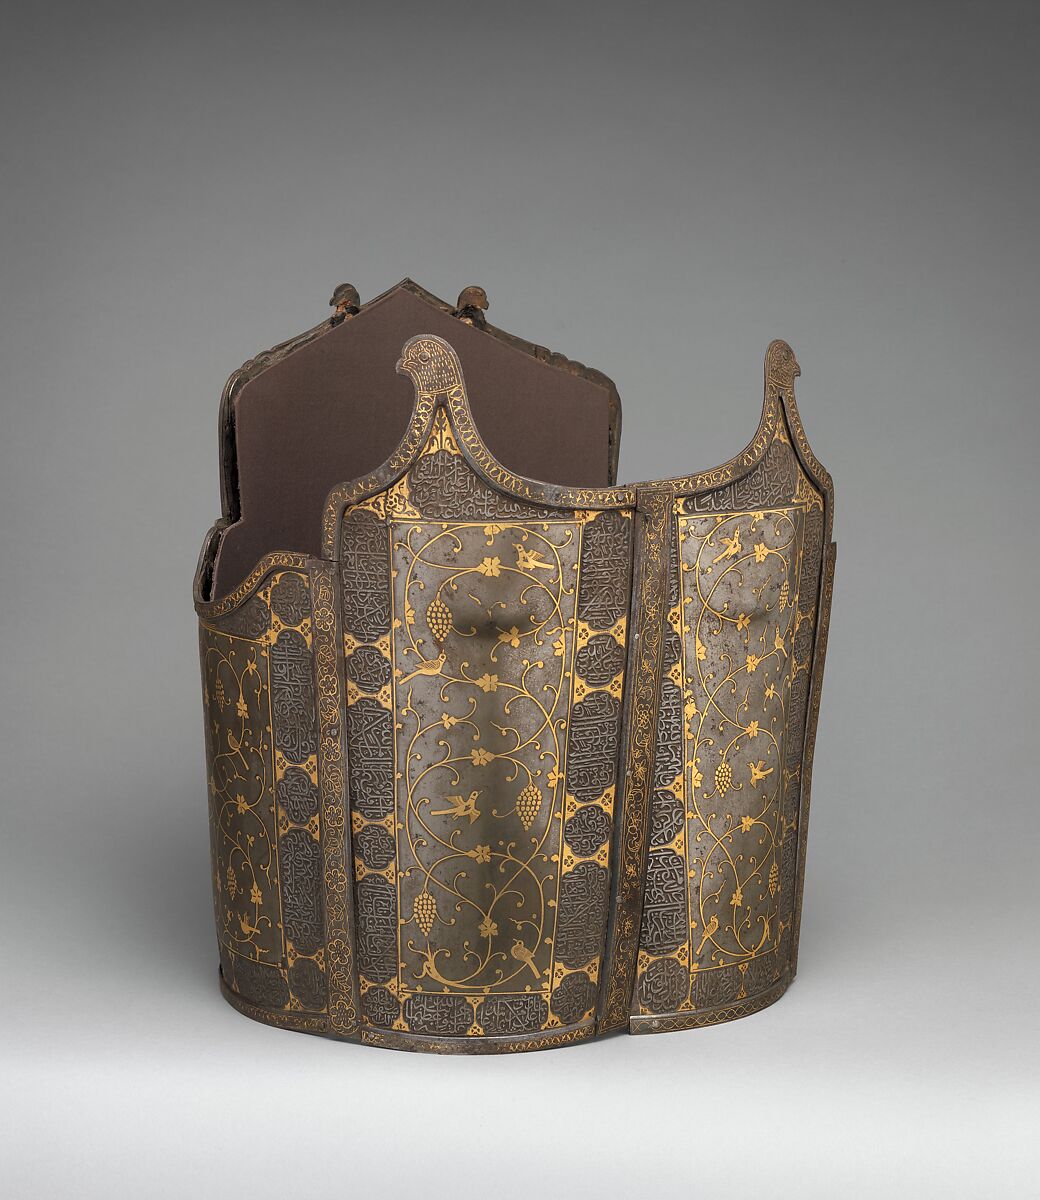 Cuirass, Steel, inlaid with gold